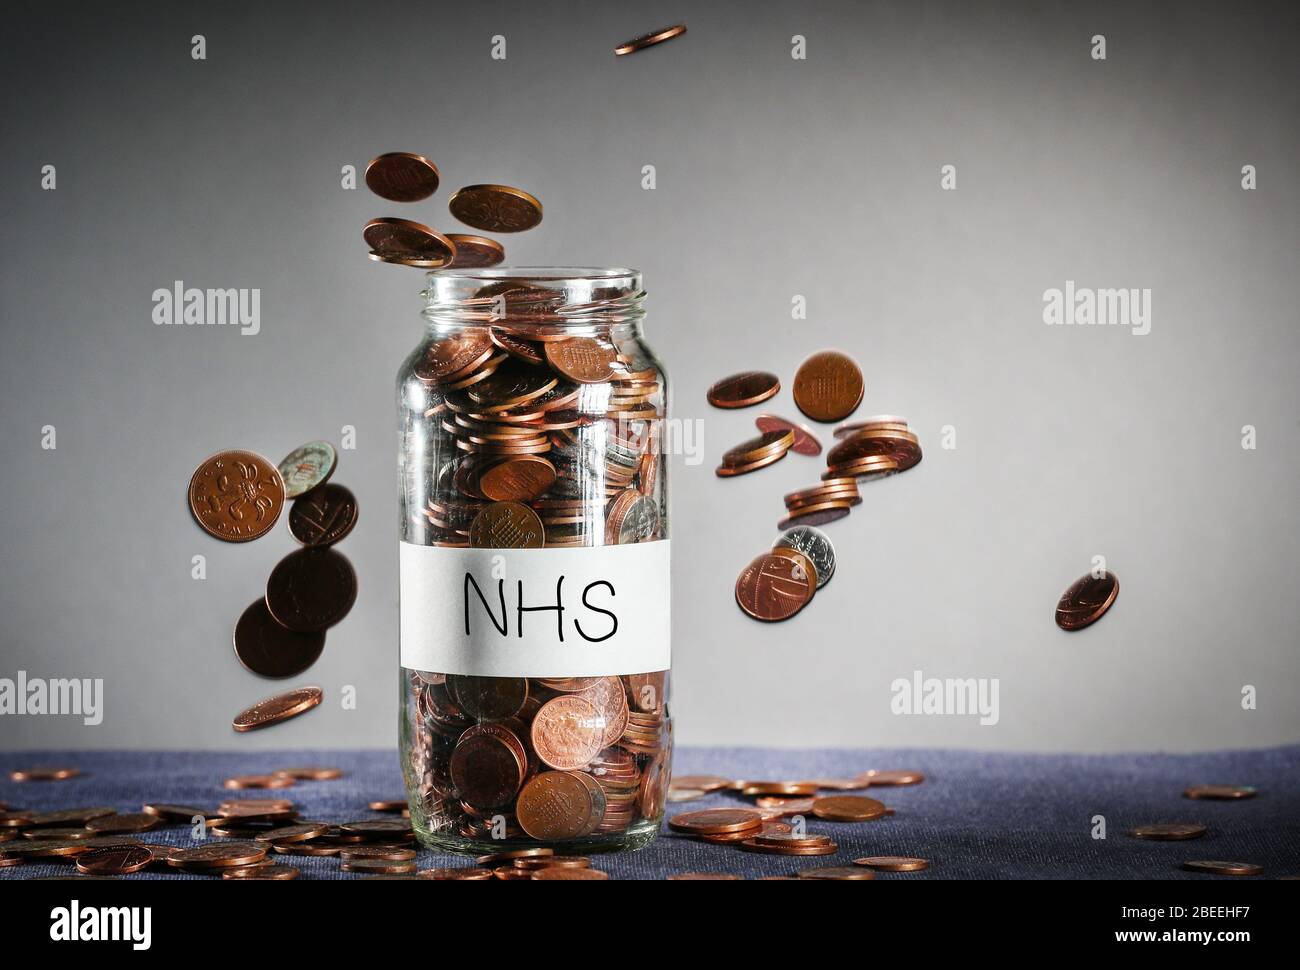 Coins falling on an NHS money jar full of UK Sterling Stock Photo